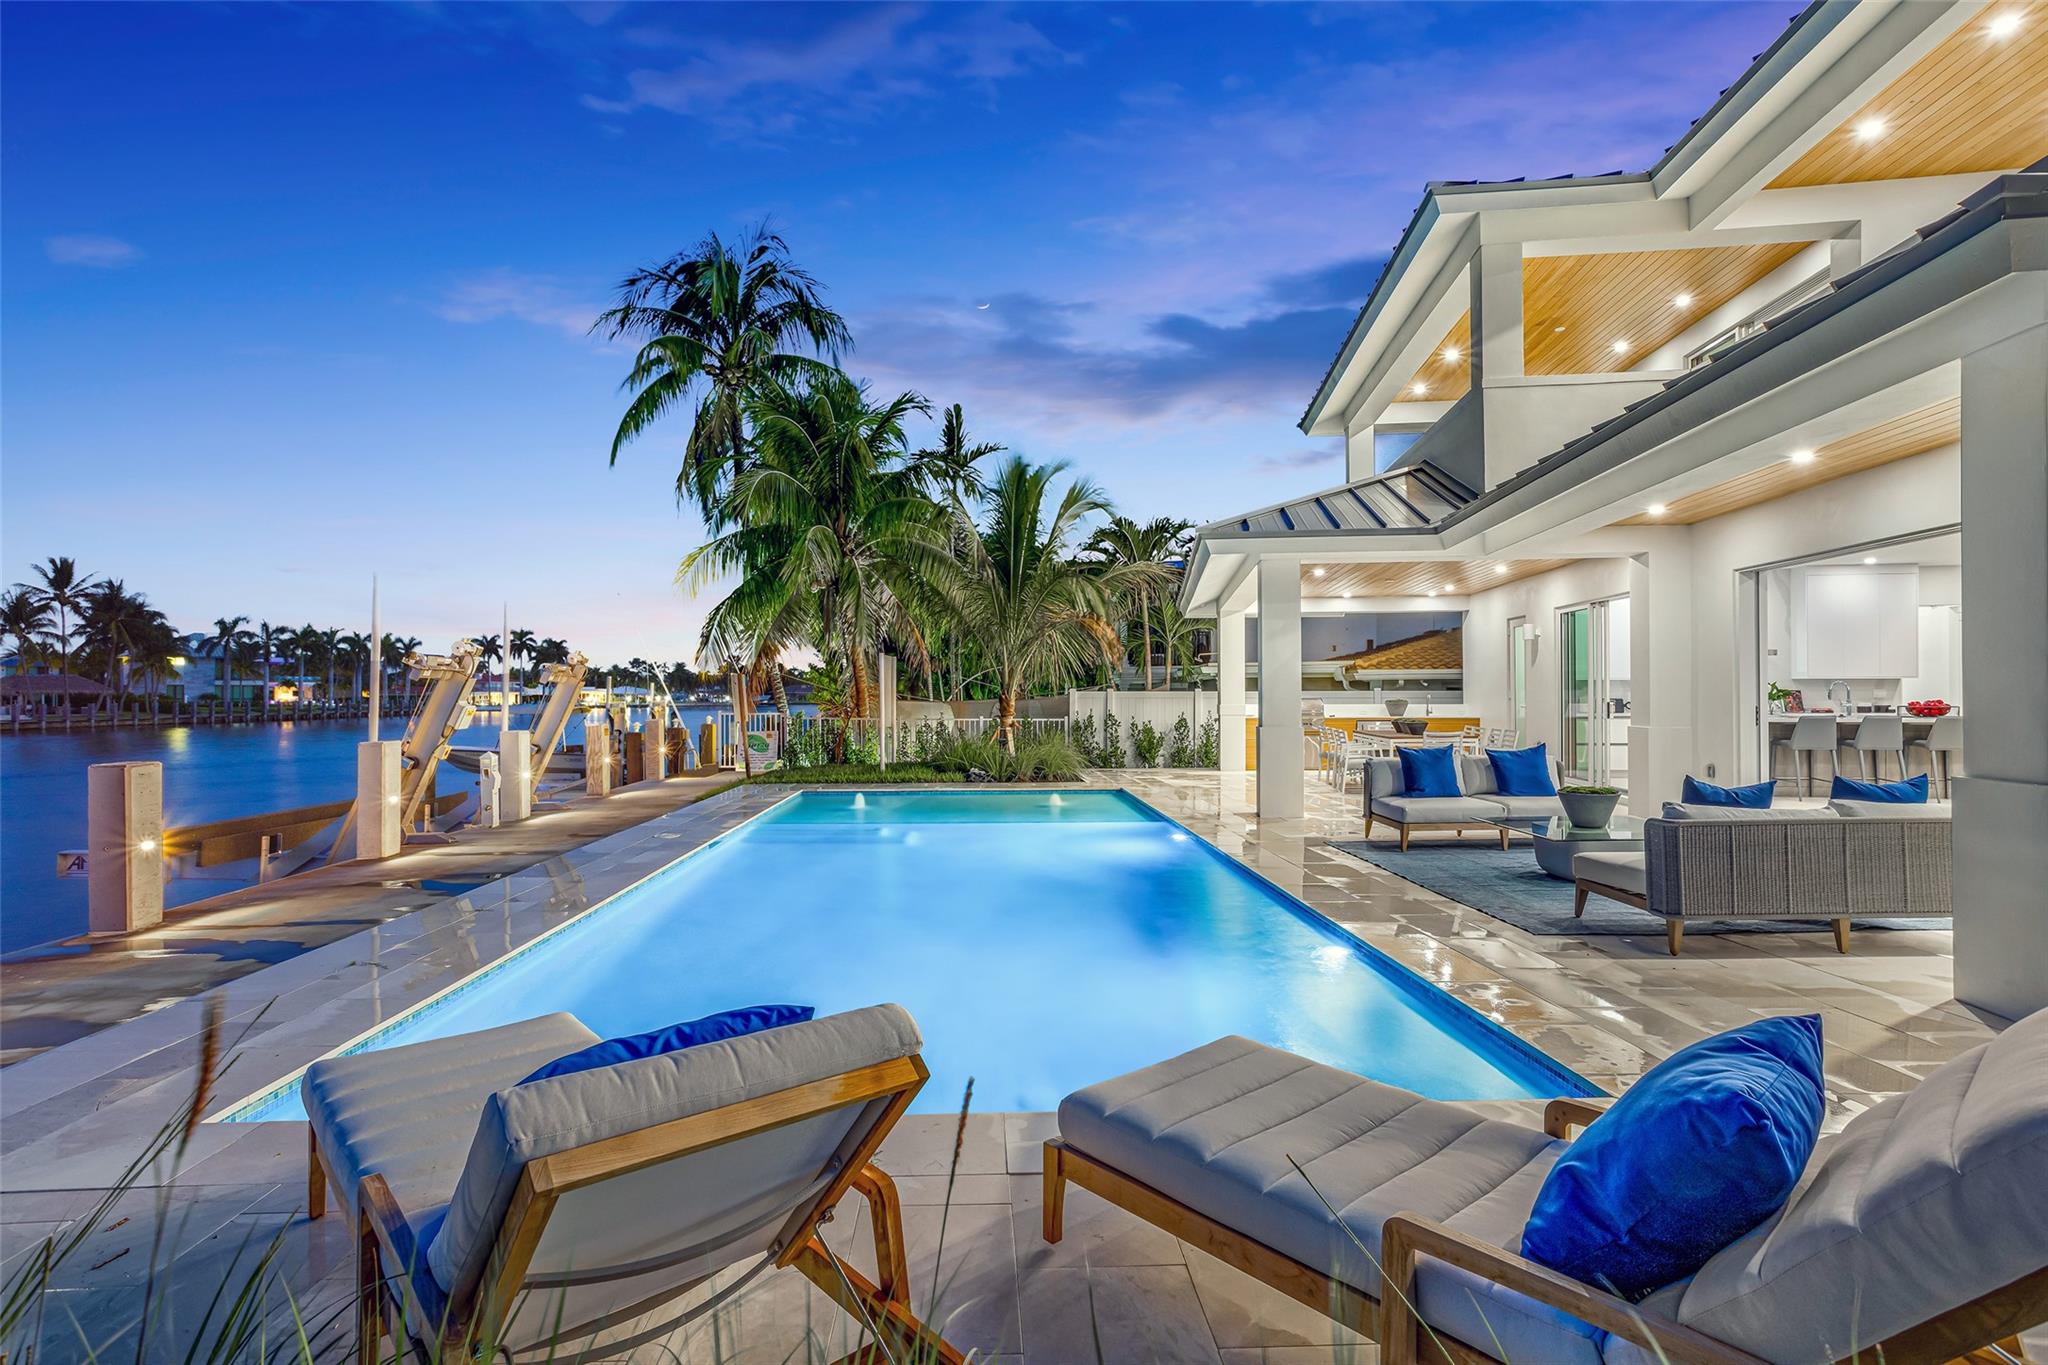 Brand New, Coastal-Inspired Intracoastal Estate artfully crafted by Garza Contractors in the exclusive enclave of Hillsboro Shores w/private beach access and fronting 77'+/- on the wide intracoastal waterway. Excellent opportunity to enjoy the very best in beachside luxury life-style offered in South Florida. Light-filled coastal interiors reveal five-bedrooms, five-bathrooms and one-half bath with 5,741+/- Total SqFt. Custom designer kitchen with quartz countertops, and luxe Thermador appliances. Second level primary suite with sitting area and spacious primary bathroom featuring an expansive walk-in wet room. For boating enthusiasts, this spectacular estate features a brand new 67'+/- concrete dock in a no-wake zone just minutes to the Hillsboro Inlet. Completion Approx. September 2023 DISCLAIMER: Information published or otherwise provided by the listing company and its representatives including but not limited to prices, measurements, square footages, lot sizes, calculations, statistics, and videos are deemed reliable but are not guaranteed and are subject to errors, omissions or changes without notice. All such information should be independently verified by any prospective purchaser or seller. Parties should perform their own due diligence to verify such information prior to a sale or listing. Listing company expressly disclaims any warranty or representation regarding such information. Prices published are either list price, sold price, and/or last asking price. The listing company participates in the Multiple Listing Service and IDX. The properties published as listed and sold are not necessarily exclusive to listing company and may be listed or have sold with other members of the Multiple Listing Service. Transactions where listing company represented both buyers and sellers are calculated as two sales. The listing company’s marketplace is all of the following: Vero Beach, Town of Orchid, Indian River Shores, Town of Palm Beach, West Palm Beach, Manalapan Beach, Point Manalapan, Hypoluxo Island, Ocean Ridge, Gulf Stream, Delray Beach, Highland Beach, Boca Raton, East Deerfield Beach, Hillsboro Beach, Hillsboro Shores, East Pompano Beach, Lighthouse Point, Sea Ranch Lakes and Fort Lauderdale. Cooperating brokers are advised that in the event of a Buyer default, no fees will be paid to a cooperating Broker on the Deposits retained by the Seller. No fees are paid to any cooperating broker until title passes or upon actual commencement of a lease. Some affiliations may not be applicable to certain geographic areas. If your property is currently listed with another broker, please disregard any solicitation for services. Copyright 2023 listing company All Rights Reserved.